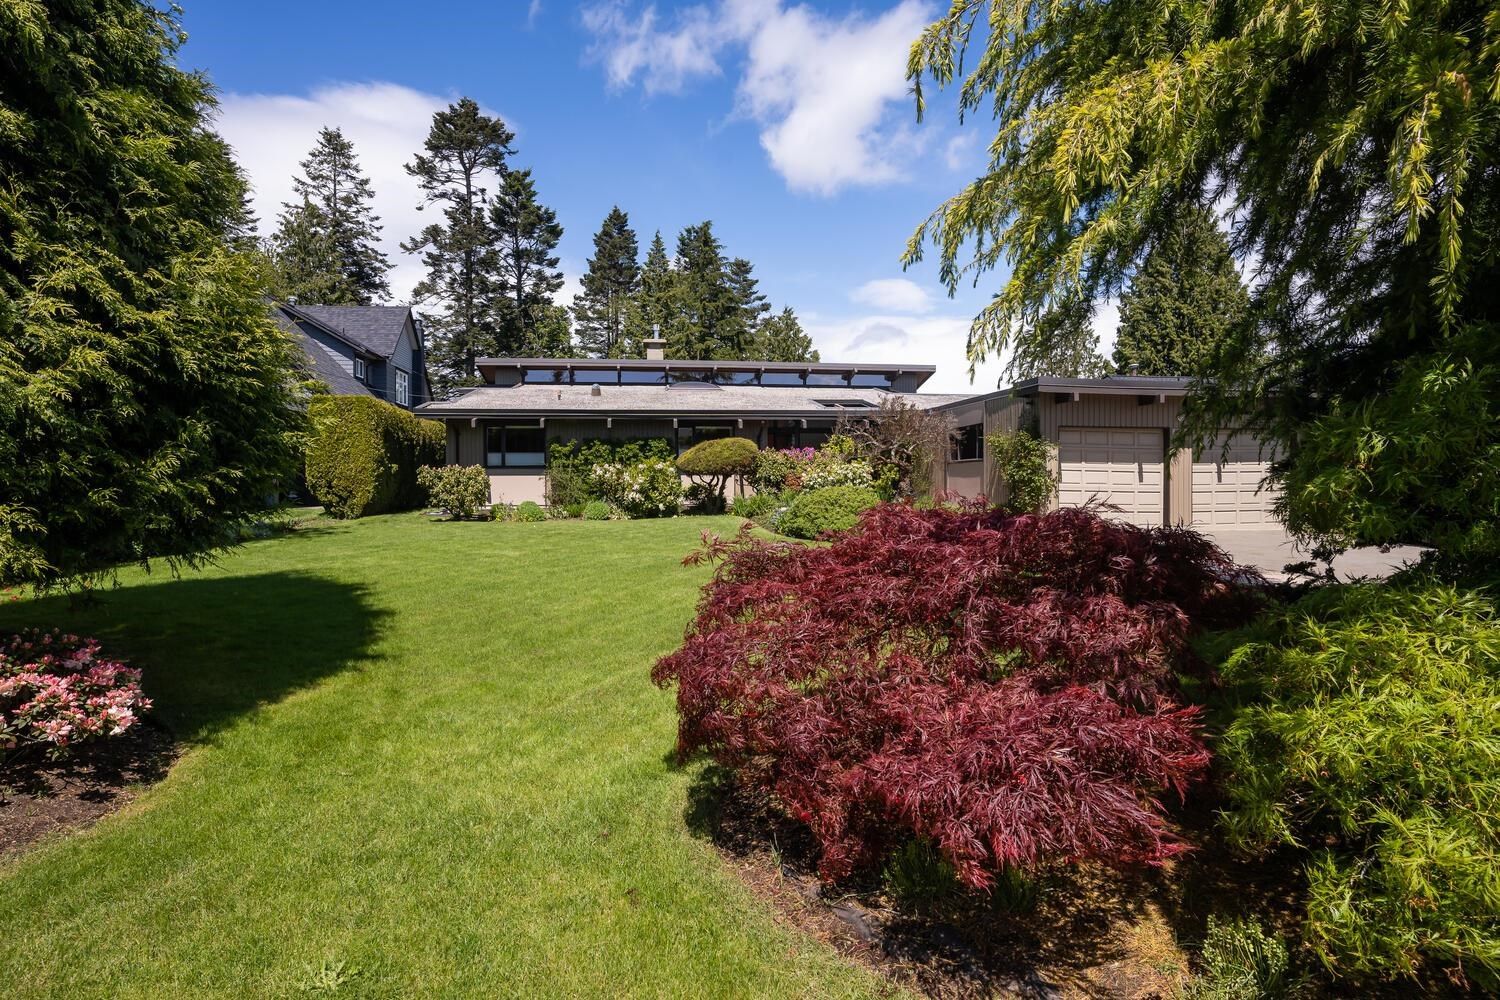 New property listed in Cliff Drive, Tsawwassen